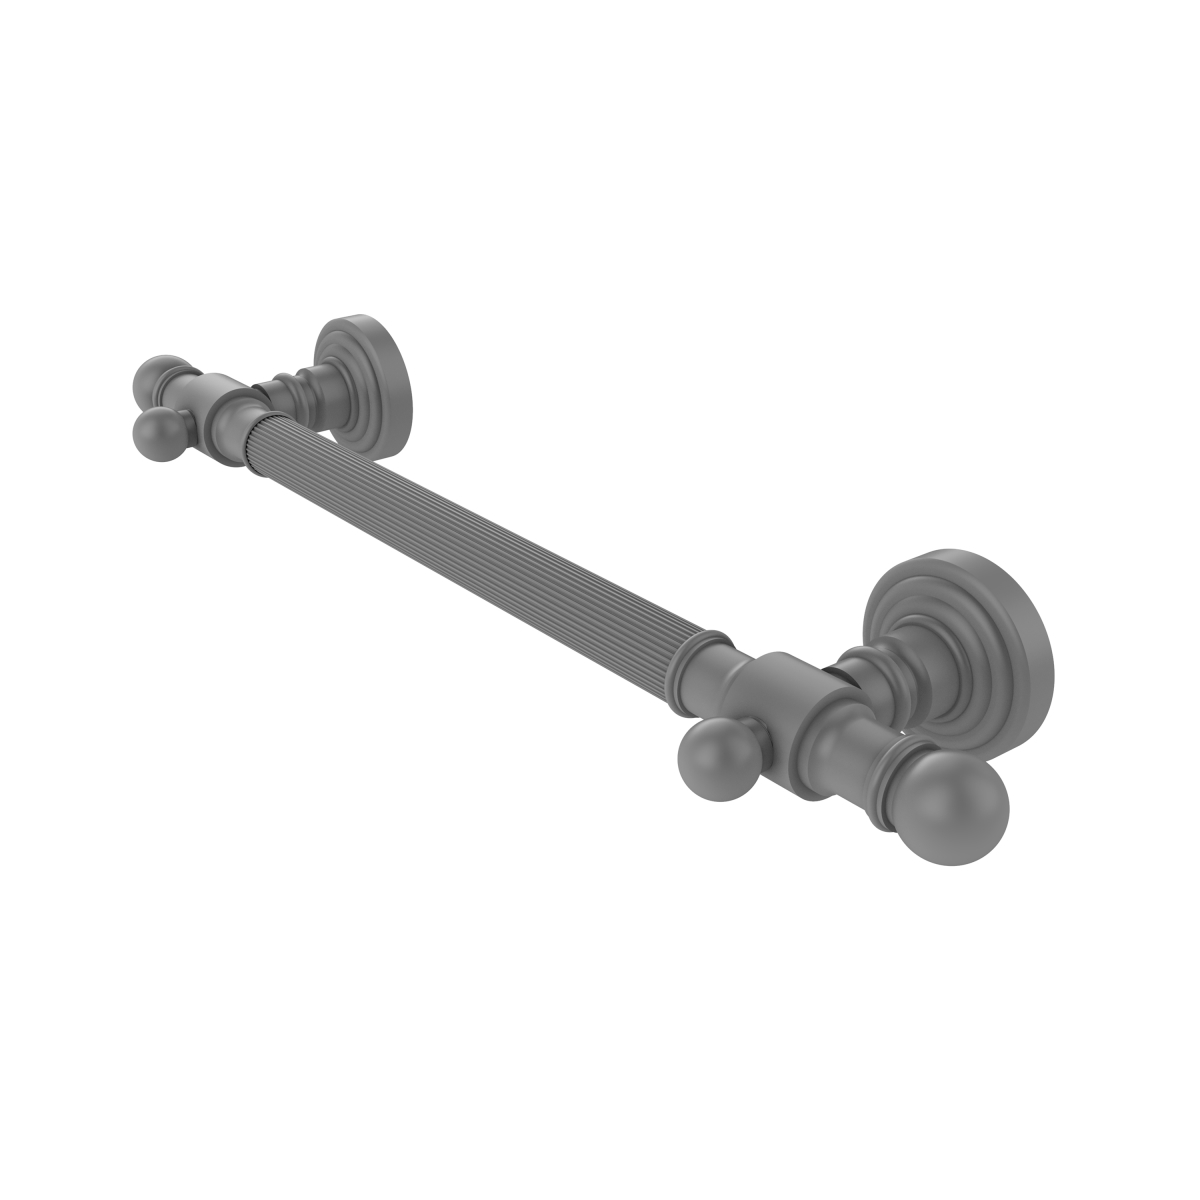 Picture of Allied Brass WP-GRR-36-GYM 36 in. Reeded Grab Bar, Matte Gray - 3.5 x 42 x 36 in.